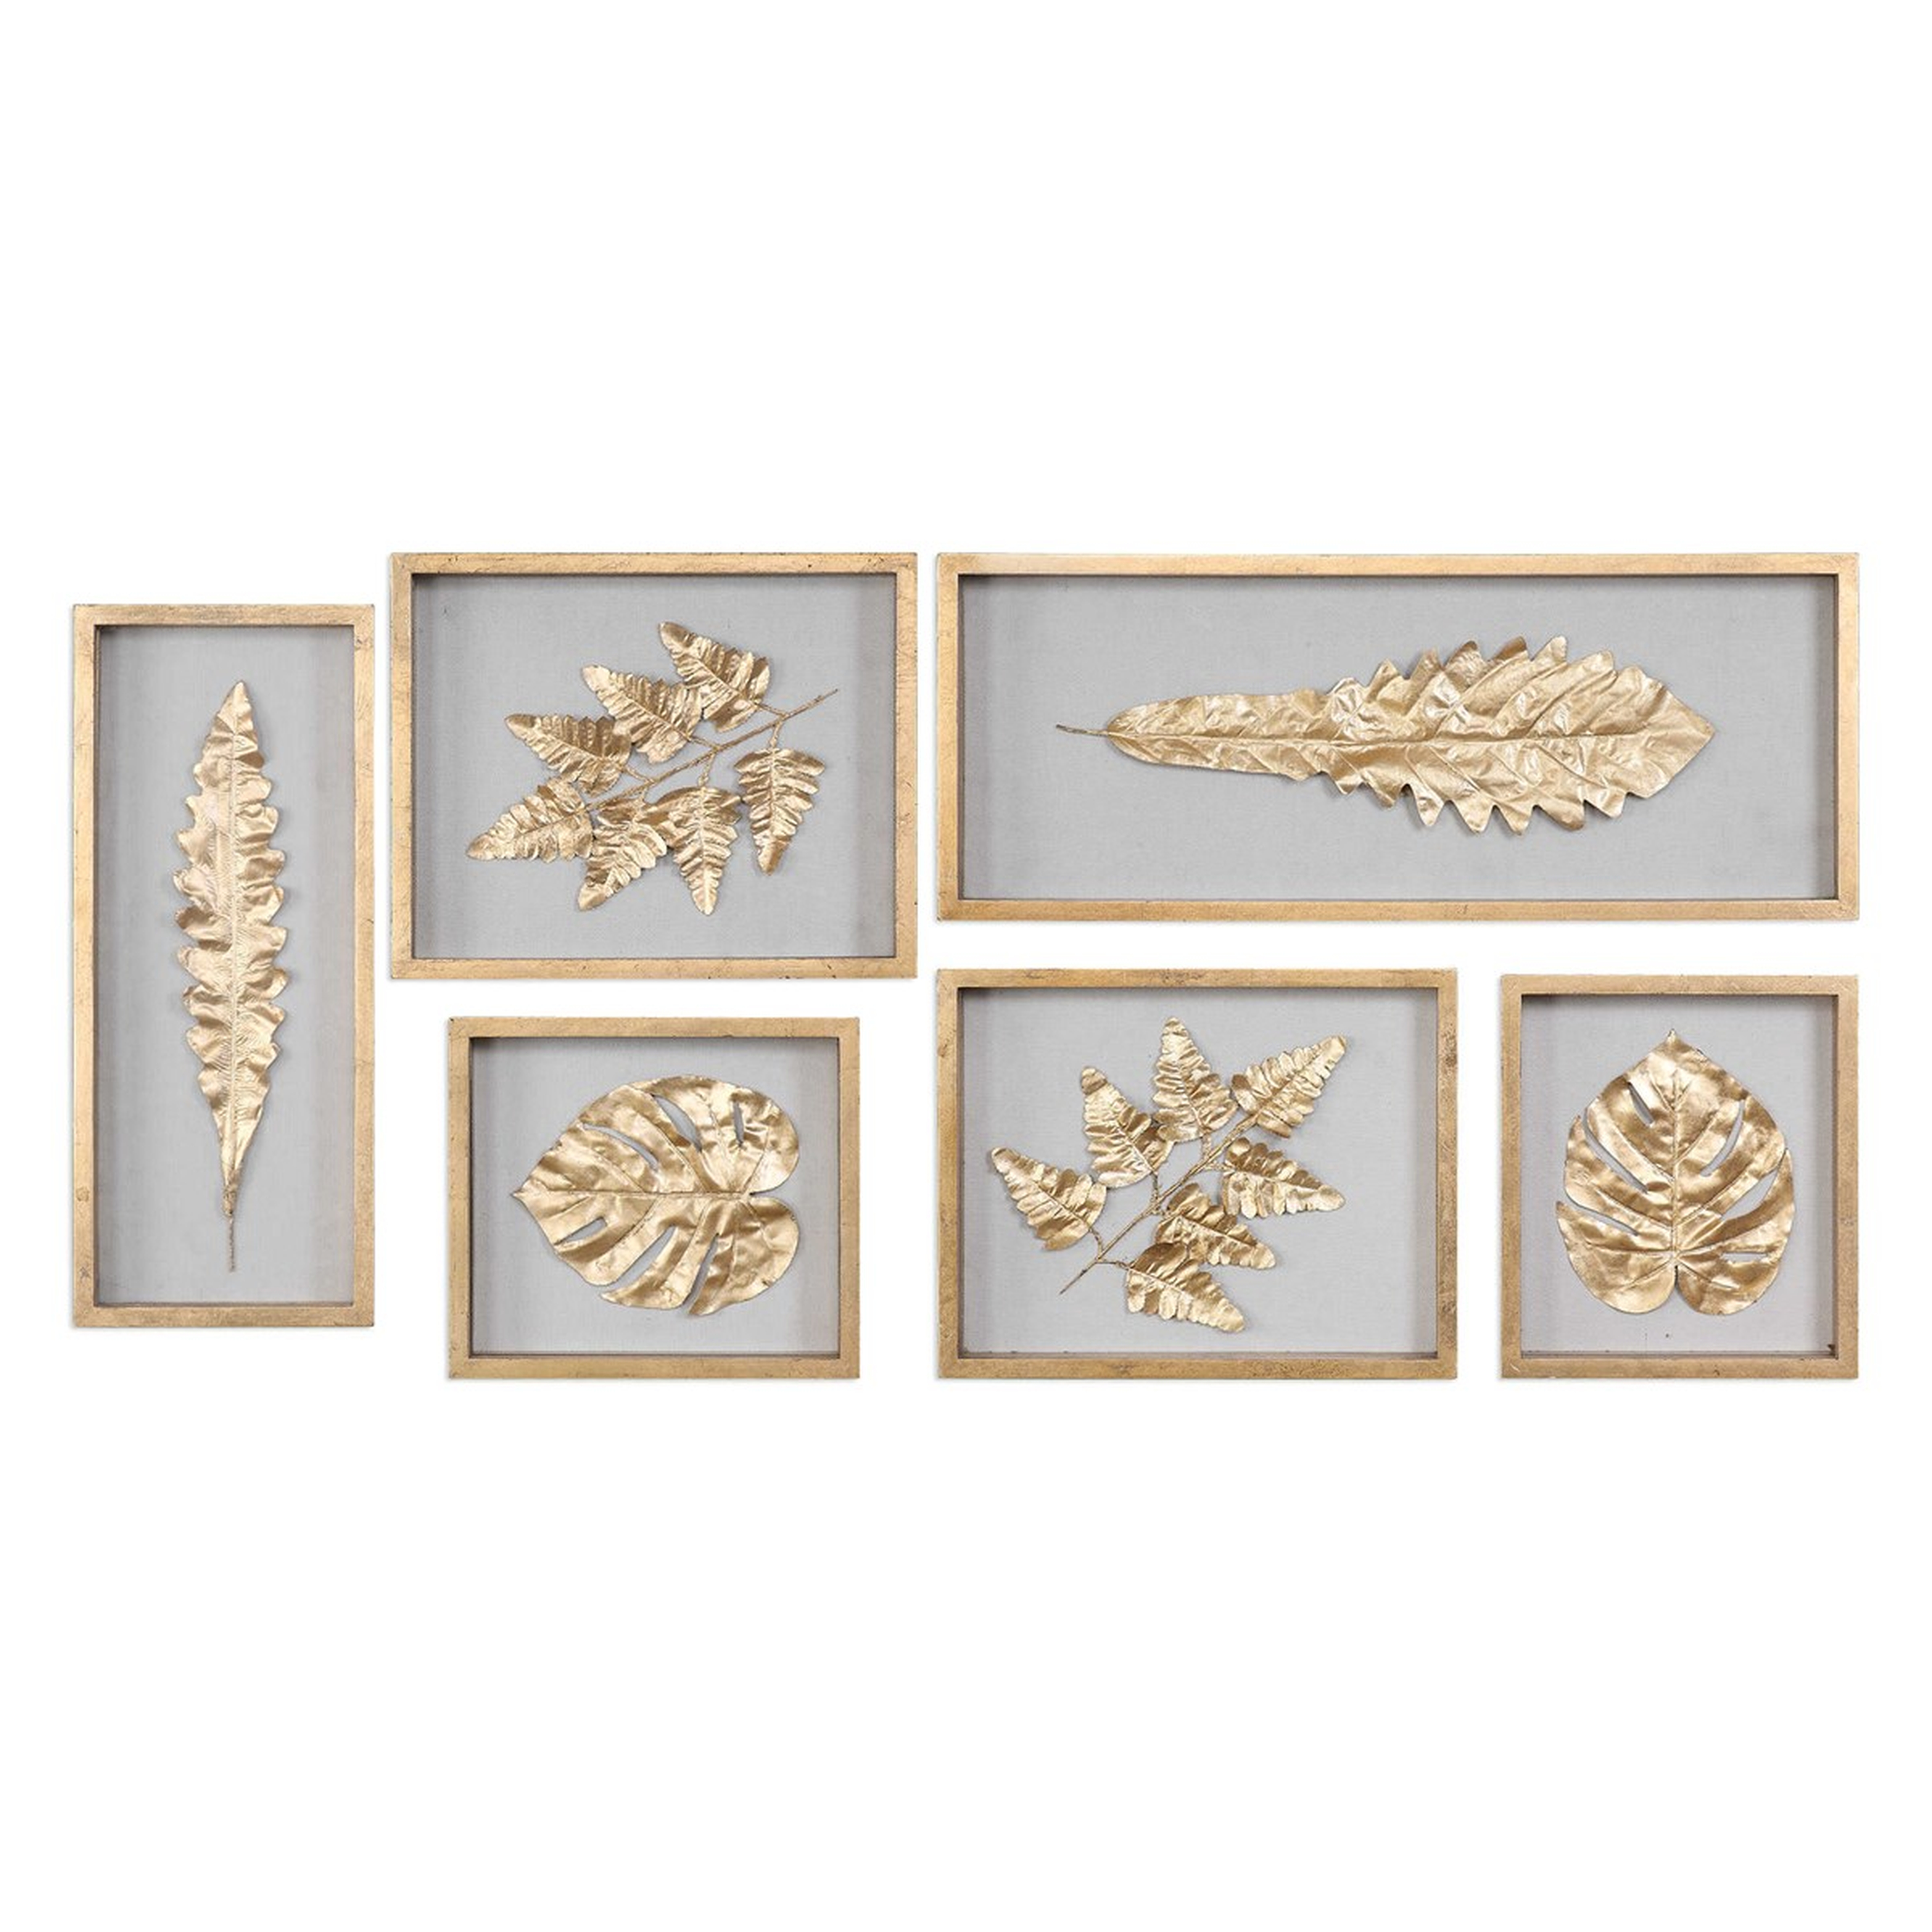 Golden Leaves Shadow Box, Set of 6 - Hudsonhill Foundry